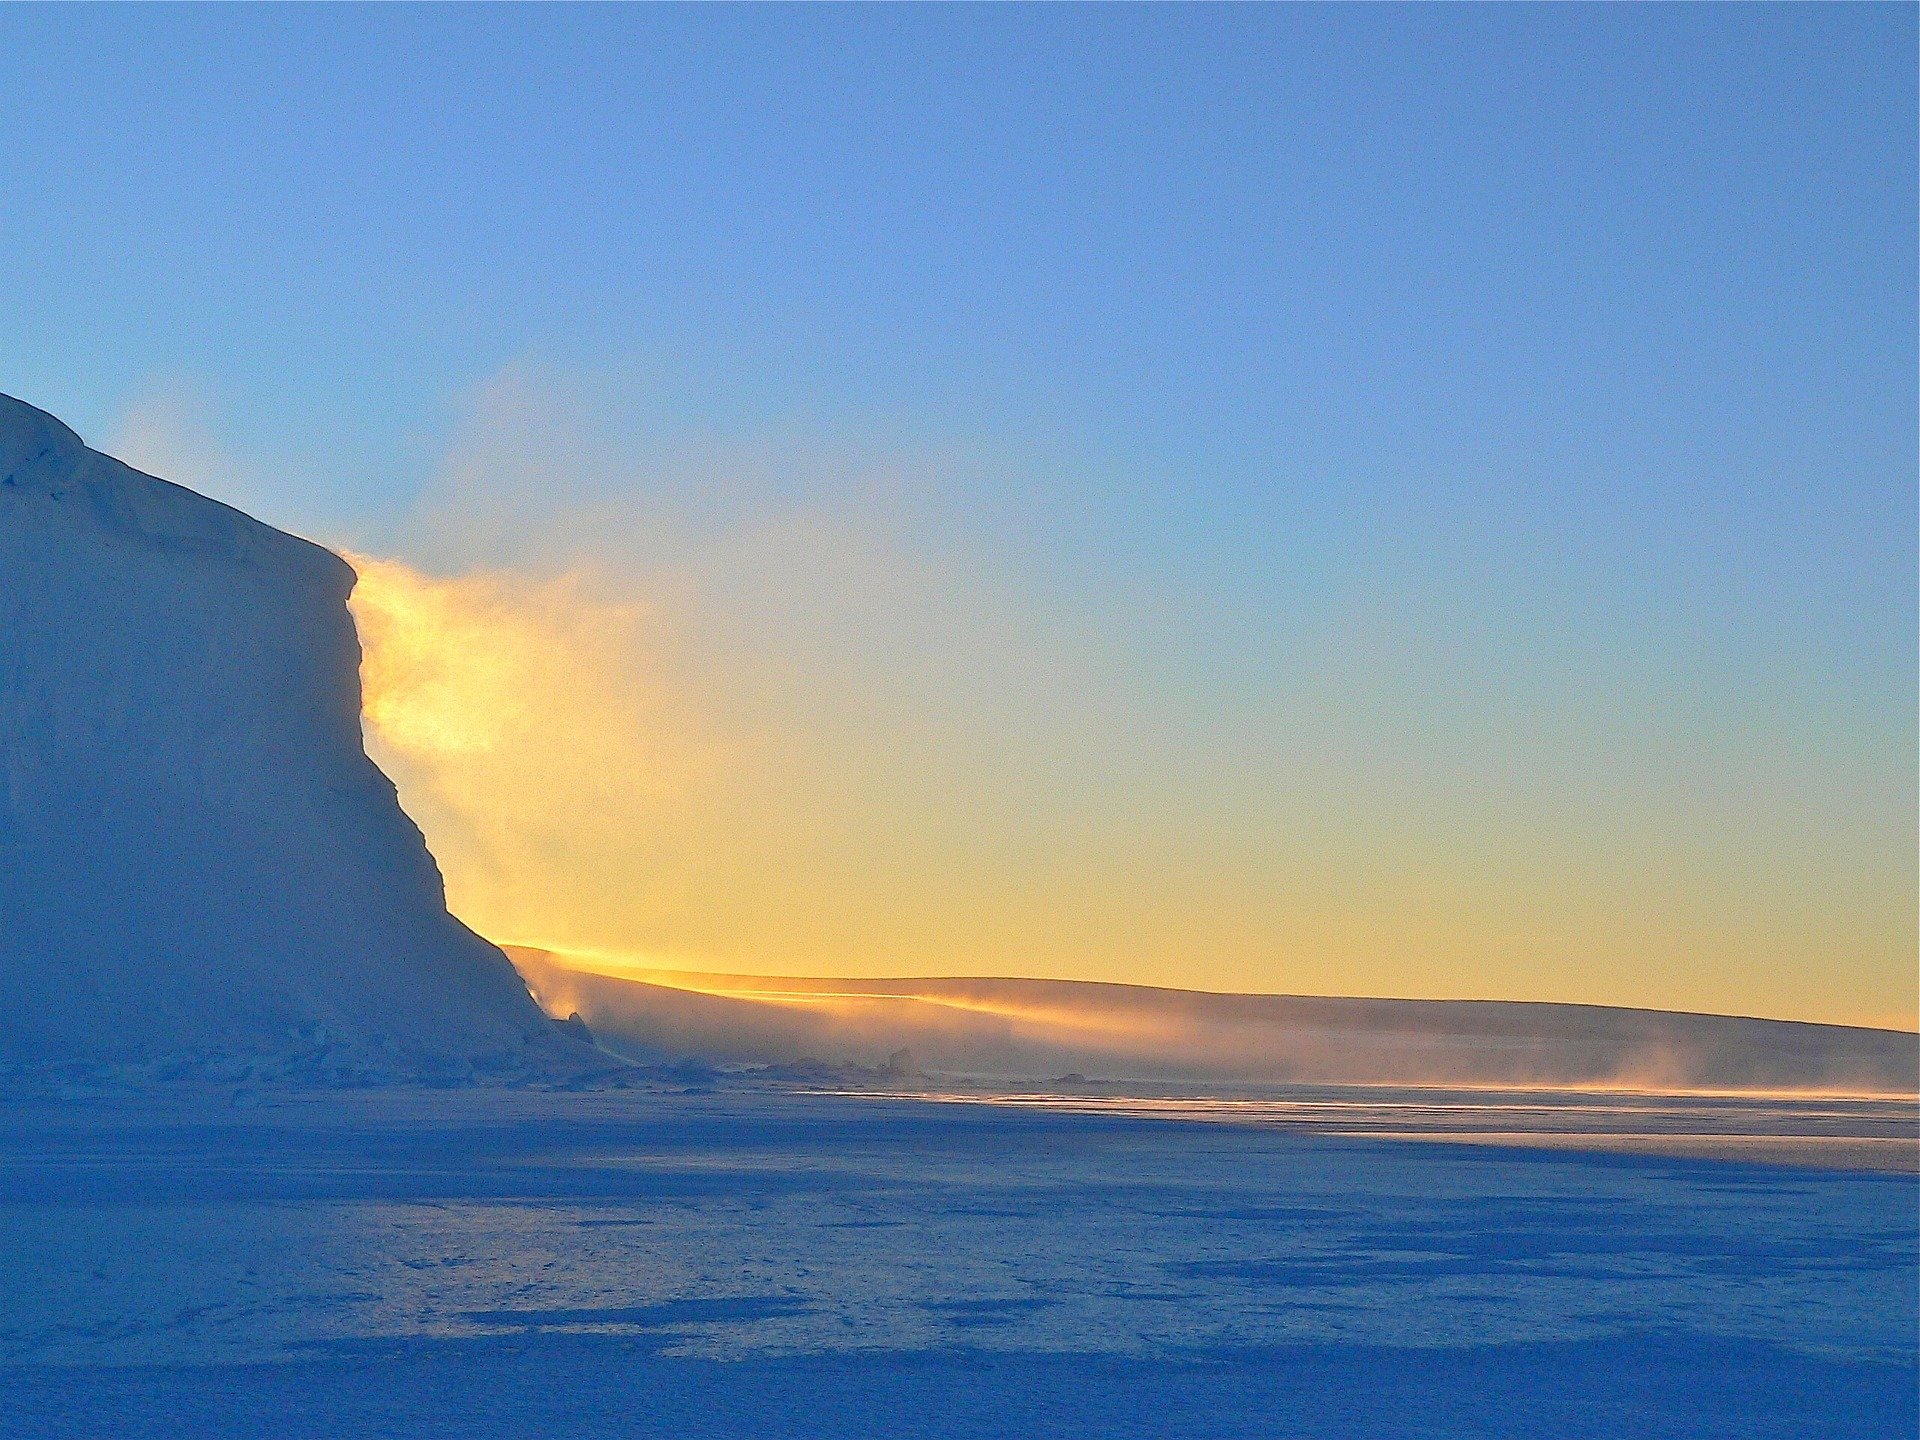 Report: Antarctic is changing dramatically, with global consequences